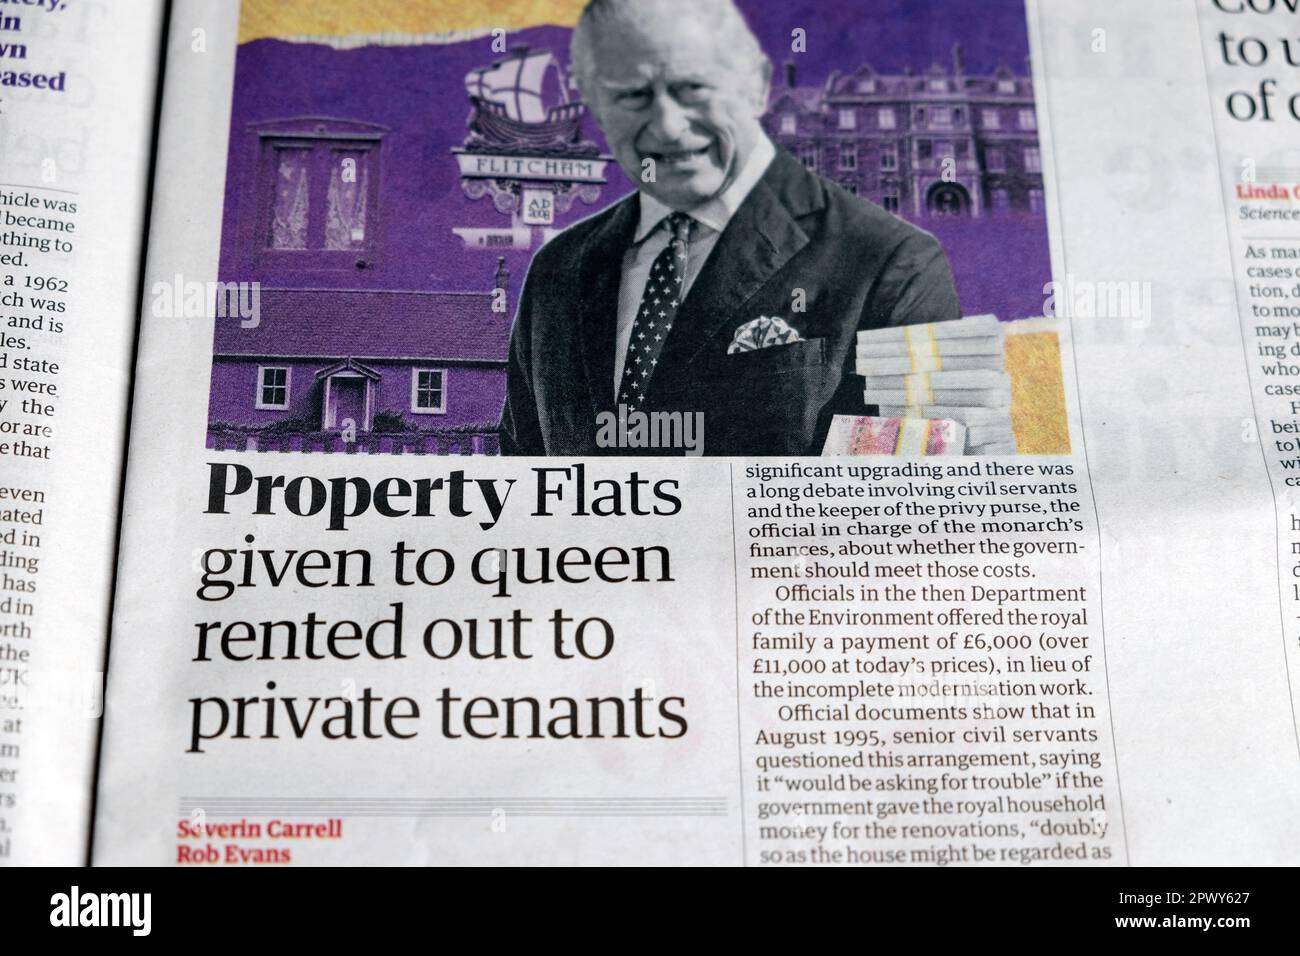 'Property Flats given to queen rented out to private tenants' Guardian newspaper headline King Charles III finances article April 2023 London UK Stock Photo